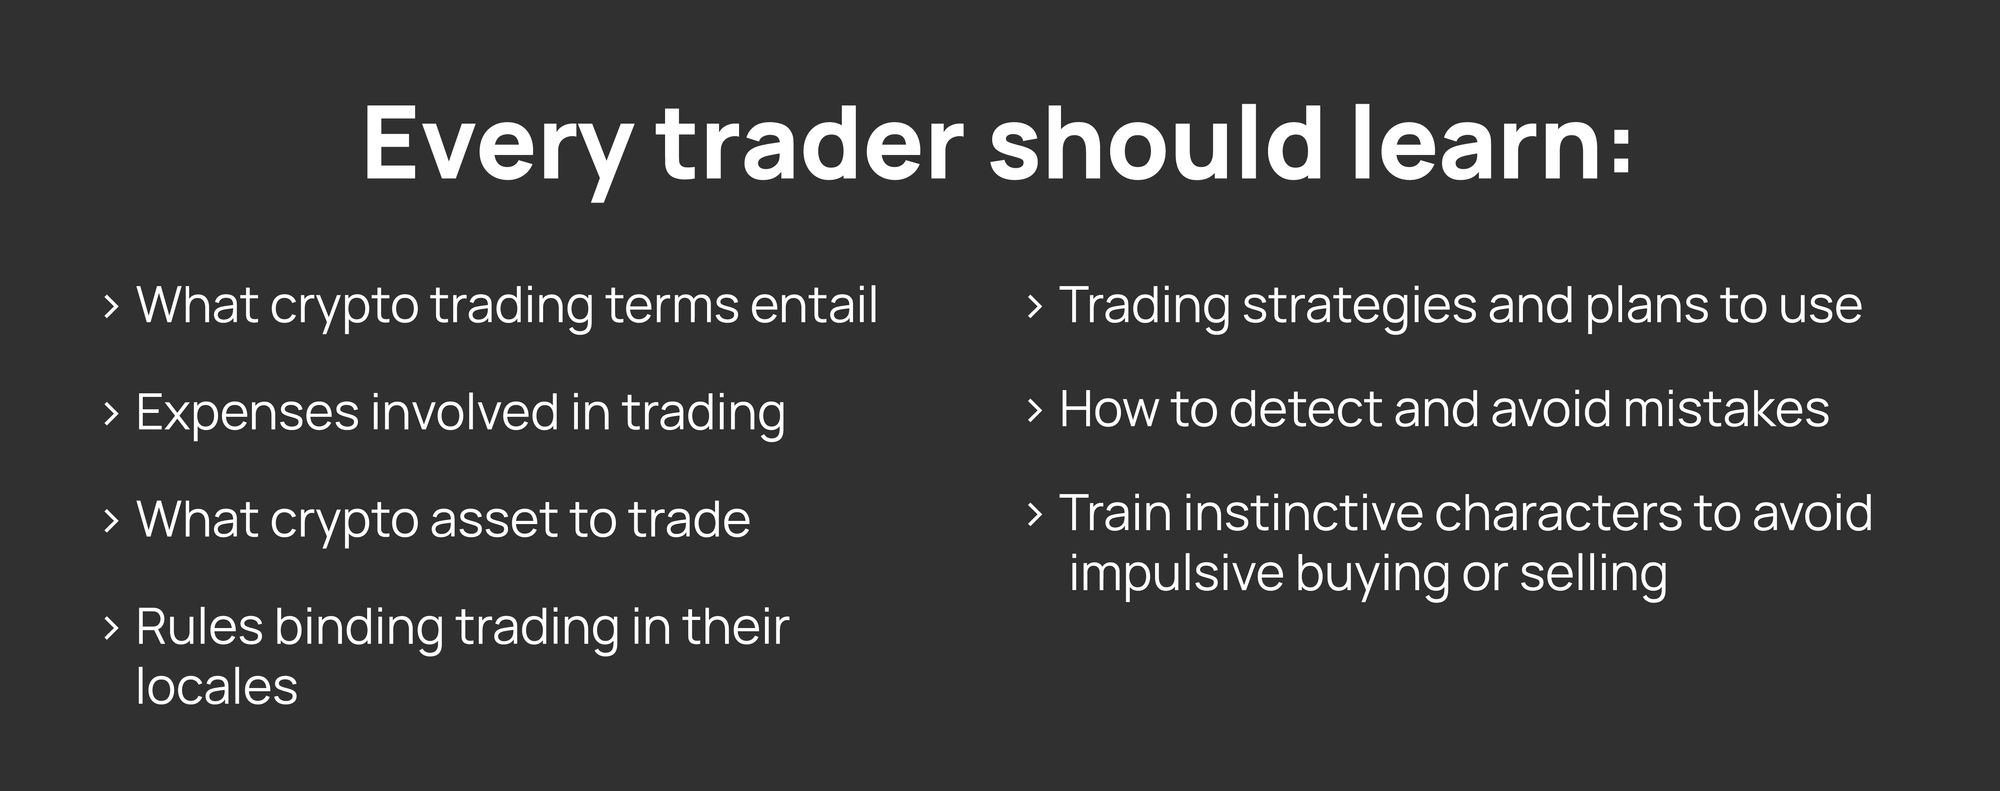 every trader or aspiring trader to take time to learn extensively